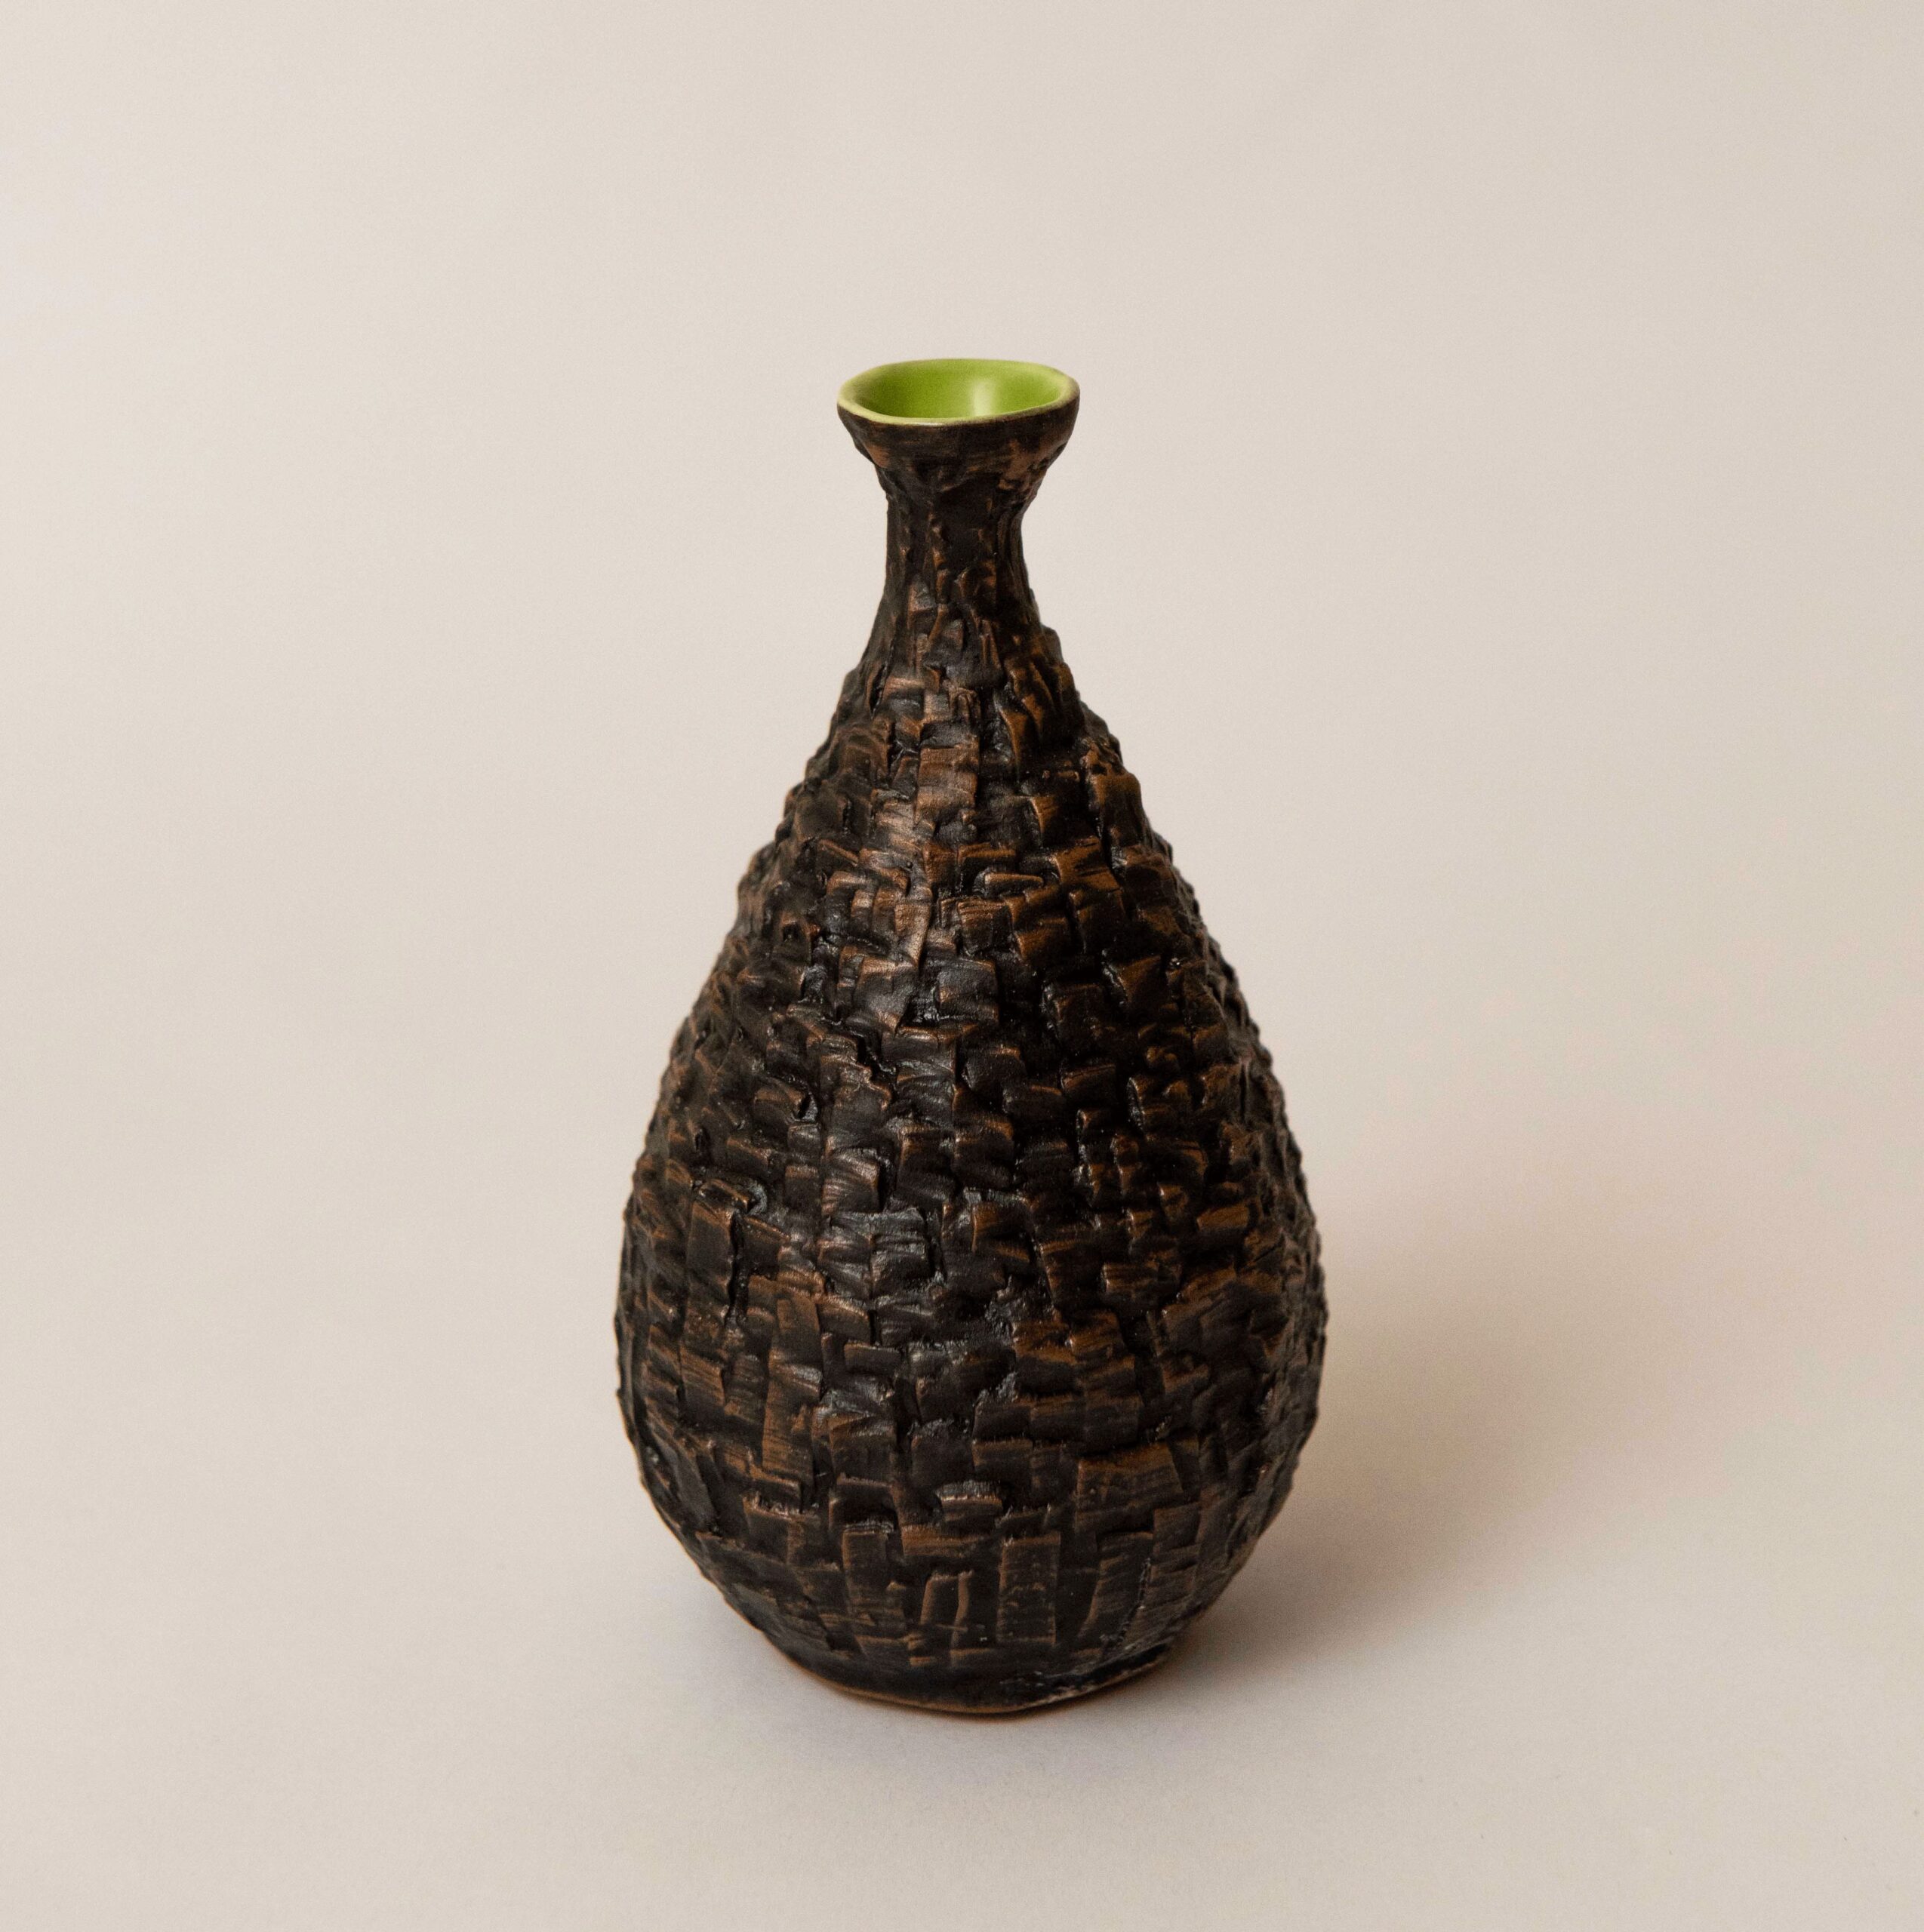 Studio Saboo: Small Rock Vase in Green Product Image 1 of 1